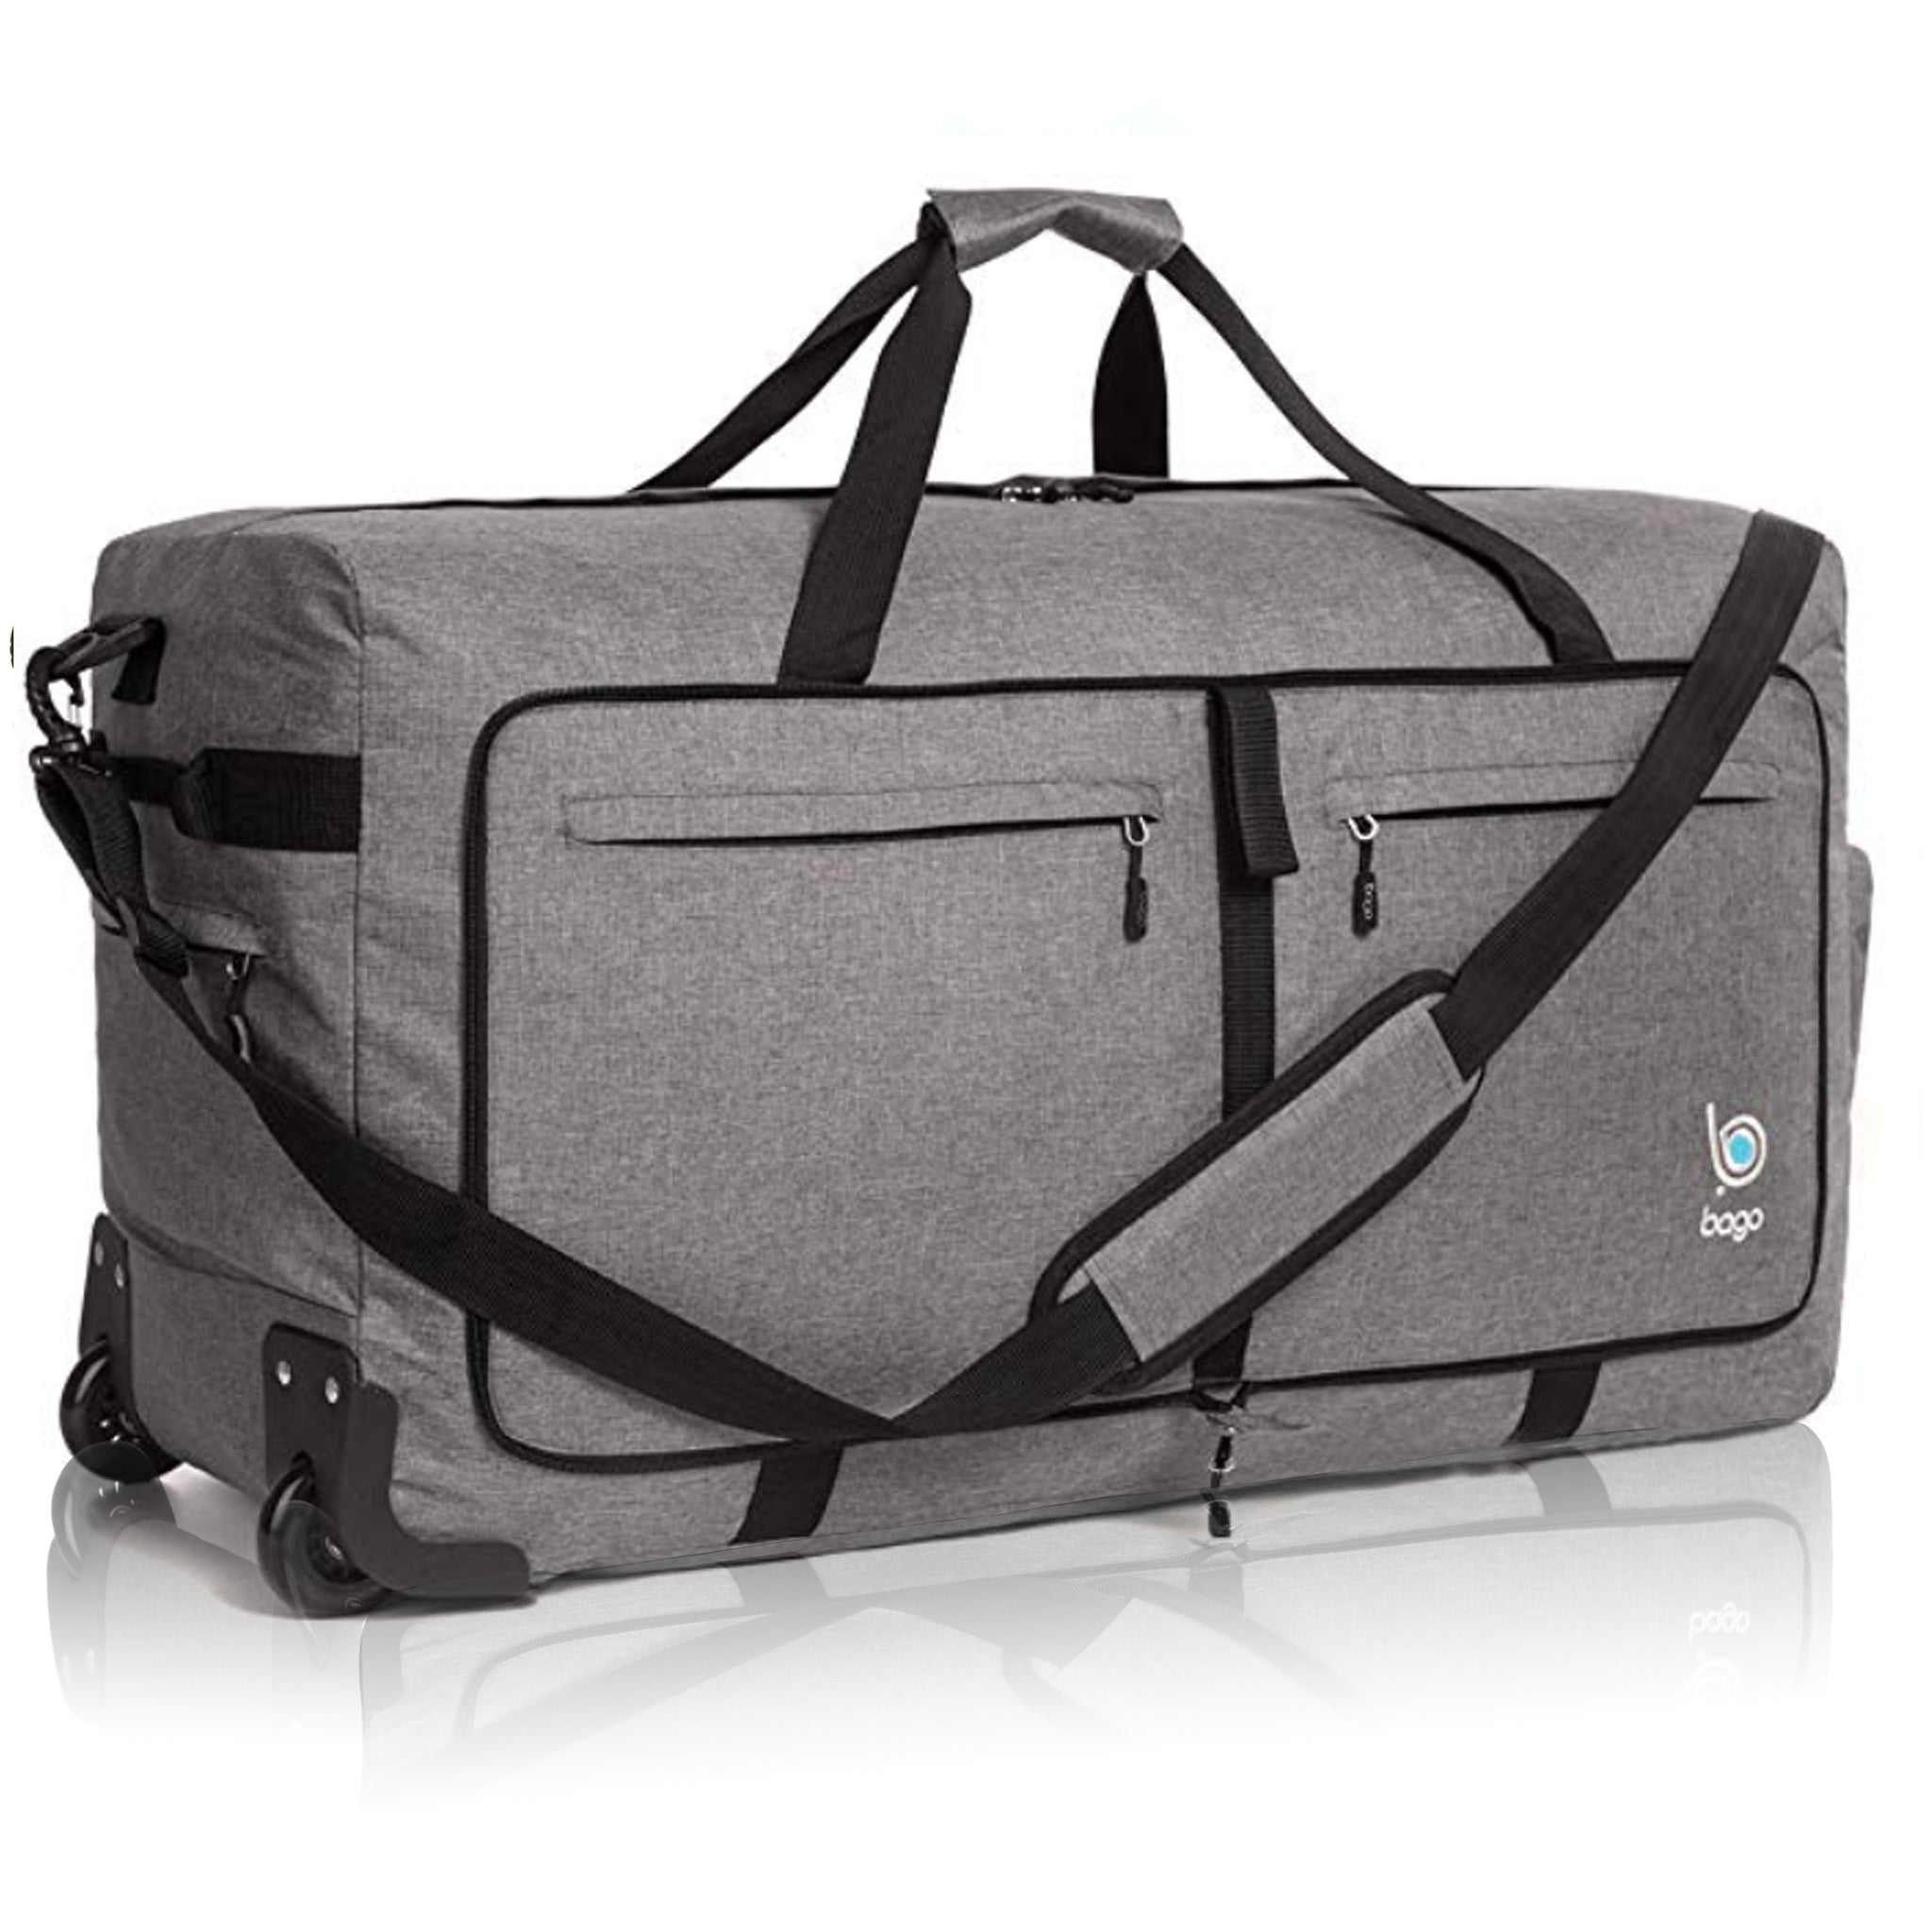 extra large travel duffel bags